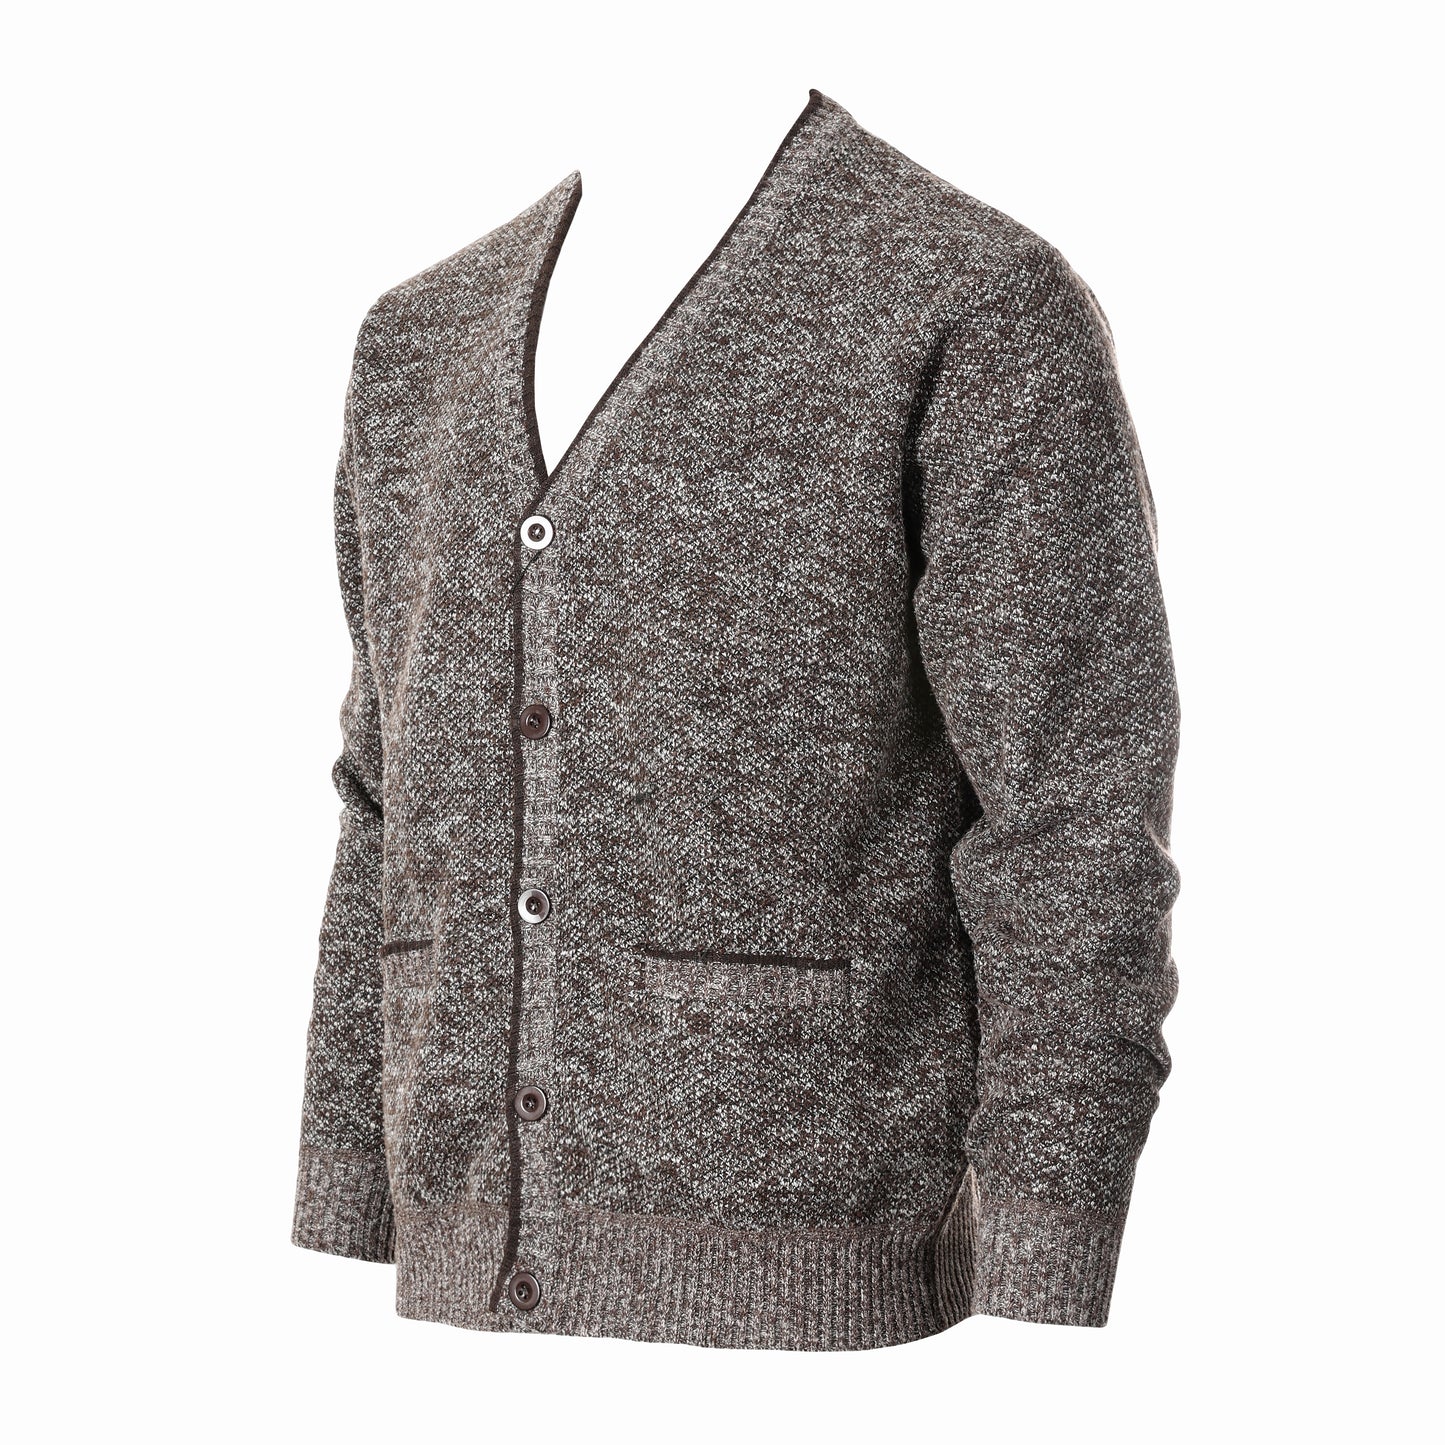 Cardigan Sweater with Soft Brushed Flannel Lining and Pockets -Coffee